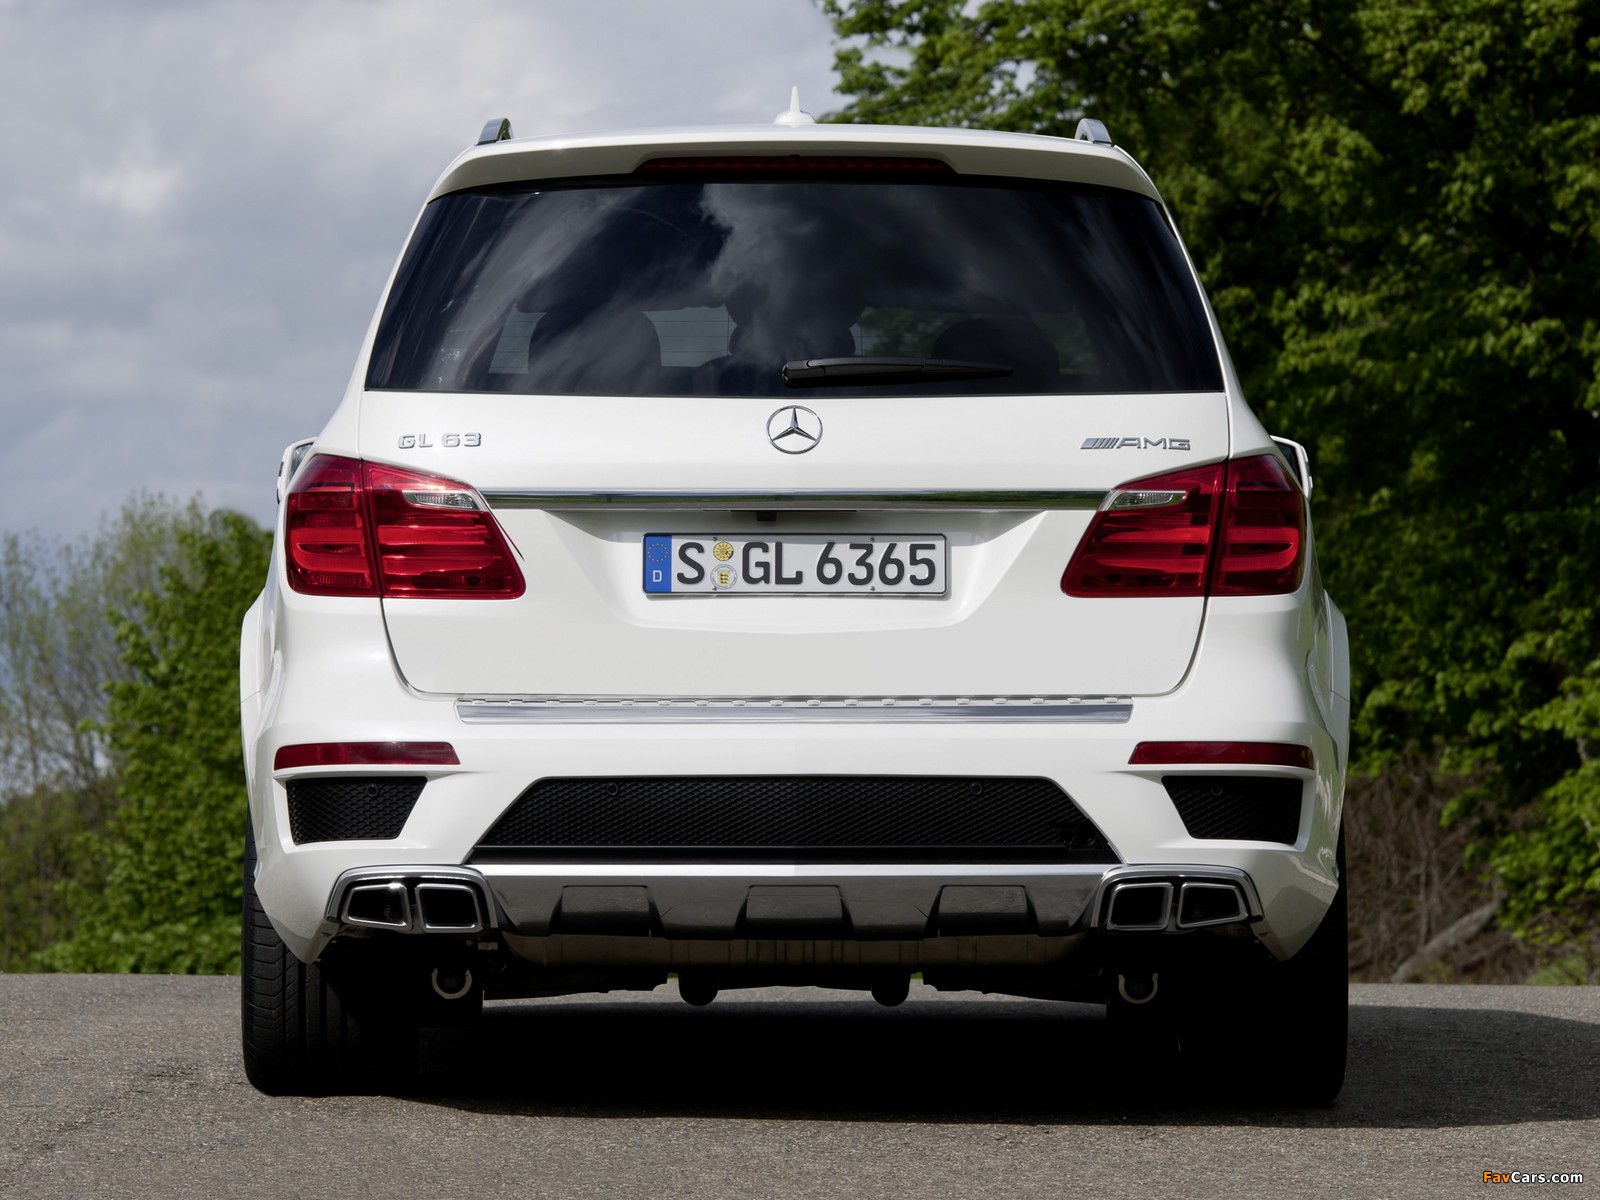 Mercedes-Benz GL 63 AMG (X166) 2012 pictures (1600 x 1200)